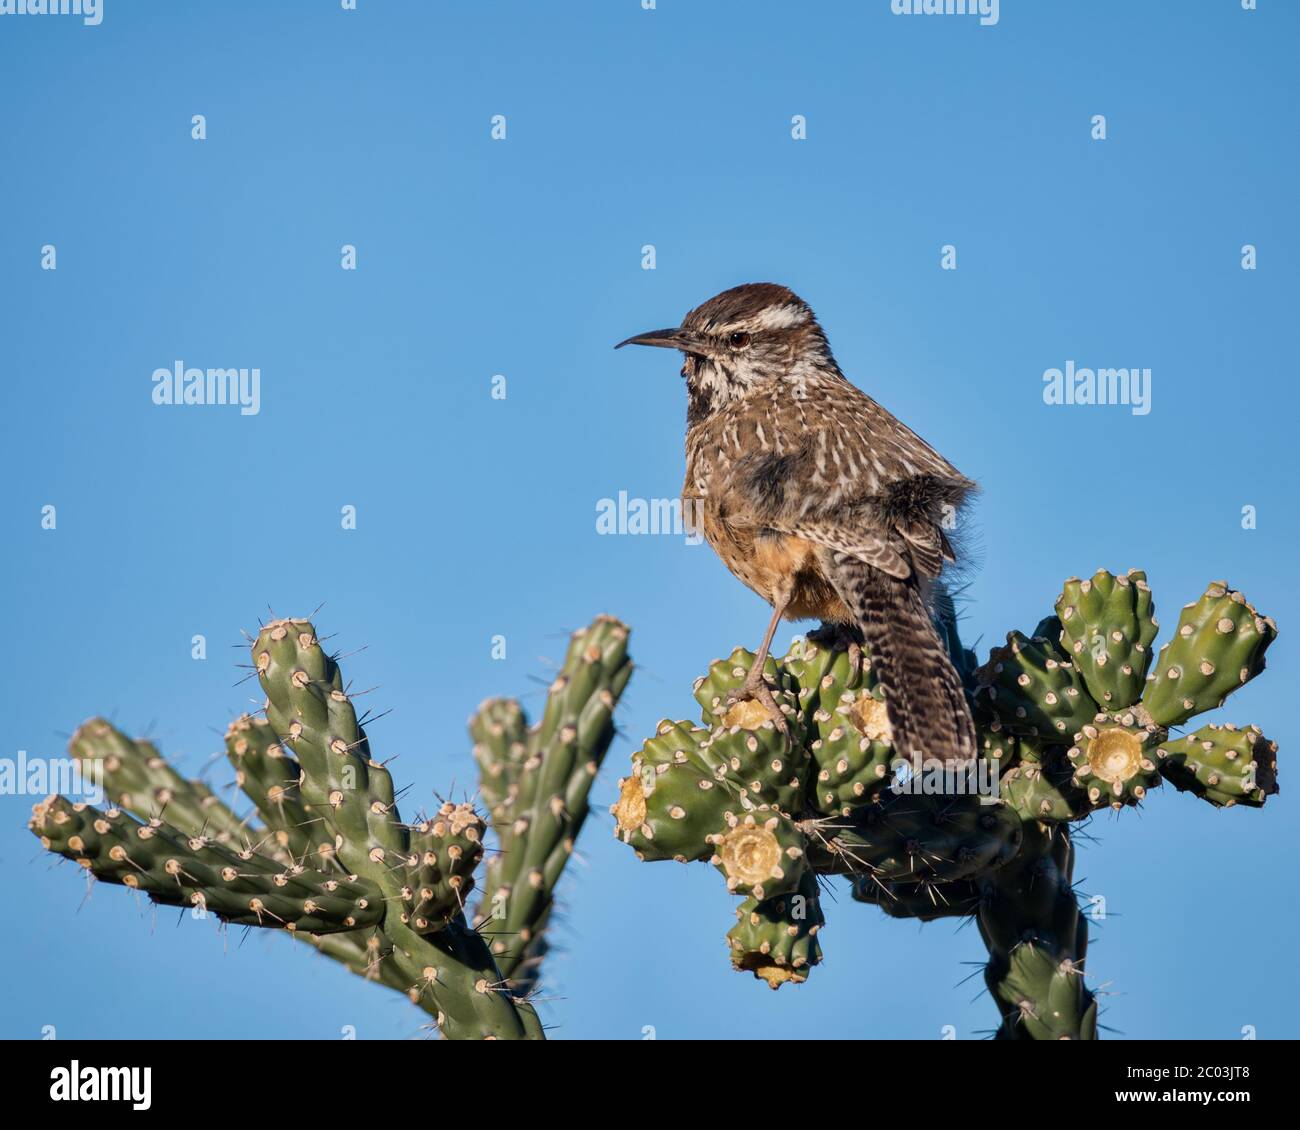 Male Cactus wren perched on a Cylindropuntia fulgida, jumping cholla, hanging chain cholla, Cholla Cactus in Arizona taking a break from nest building Stock Photo